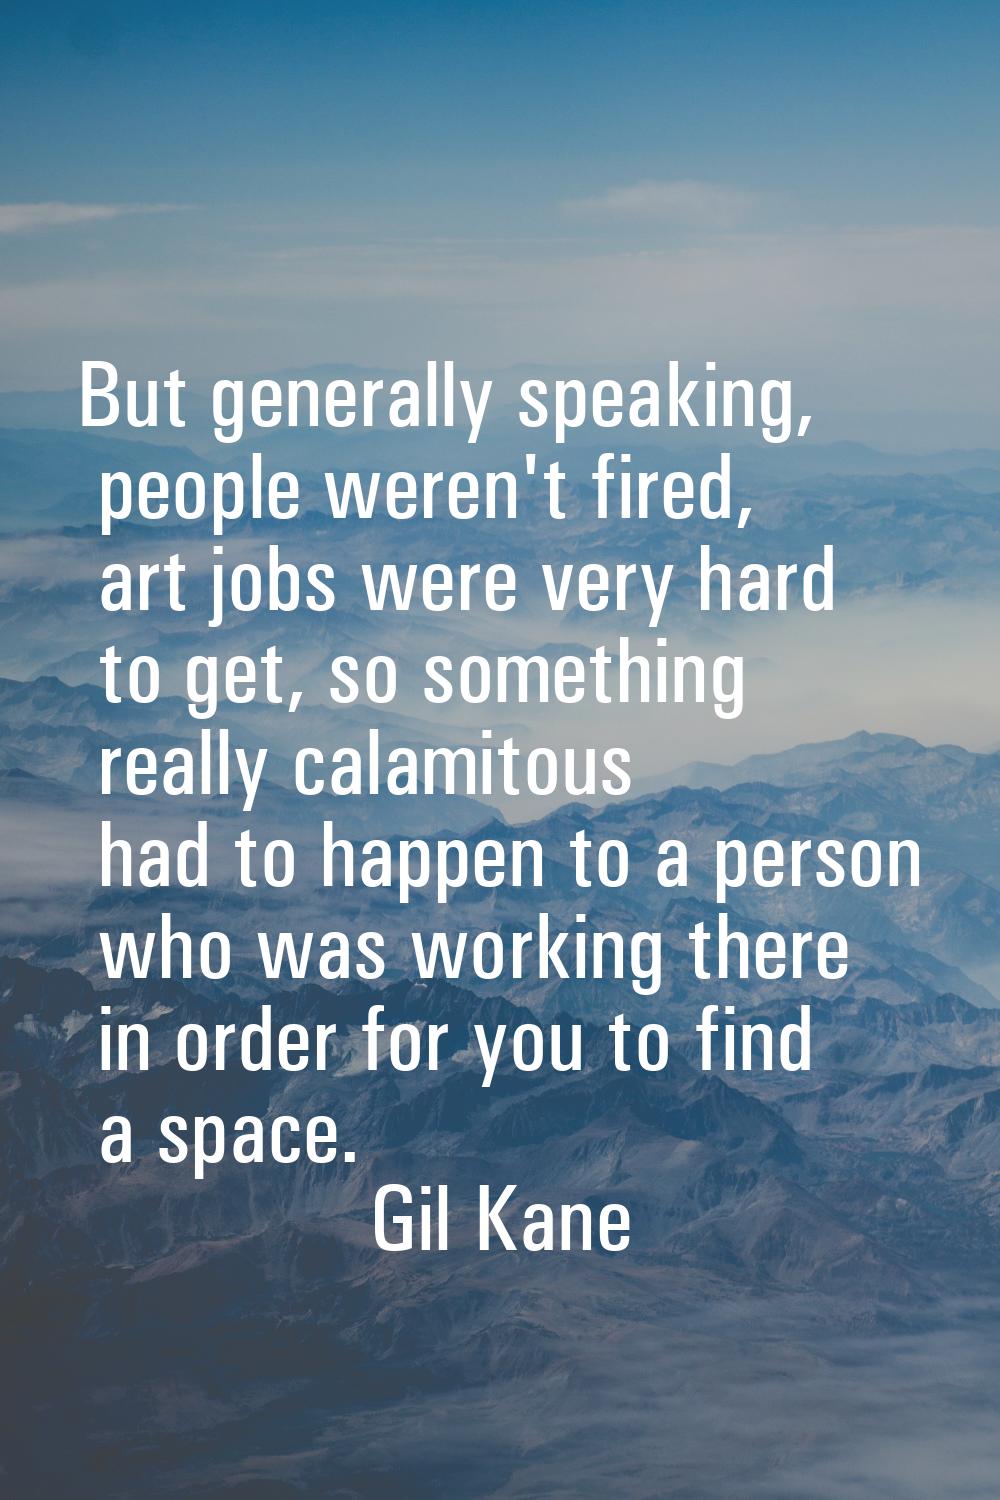 But generally speaking, people weren't fired, art jobs were very hard to get, so something really c